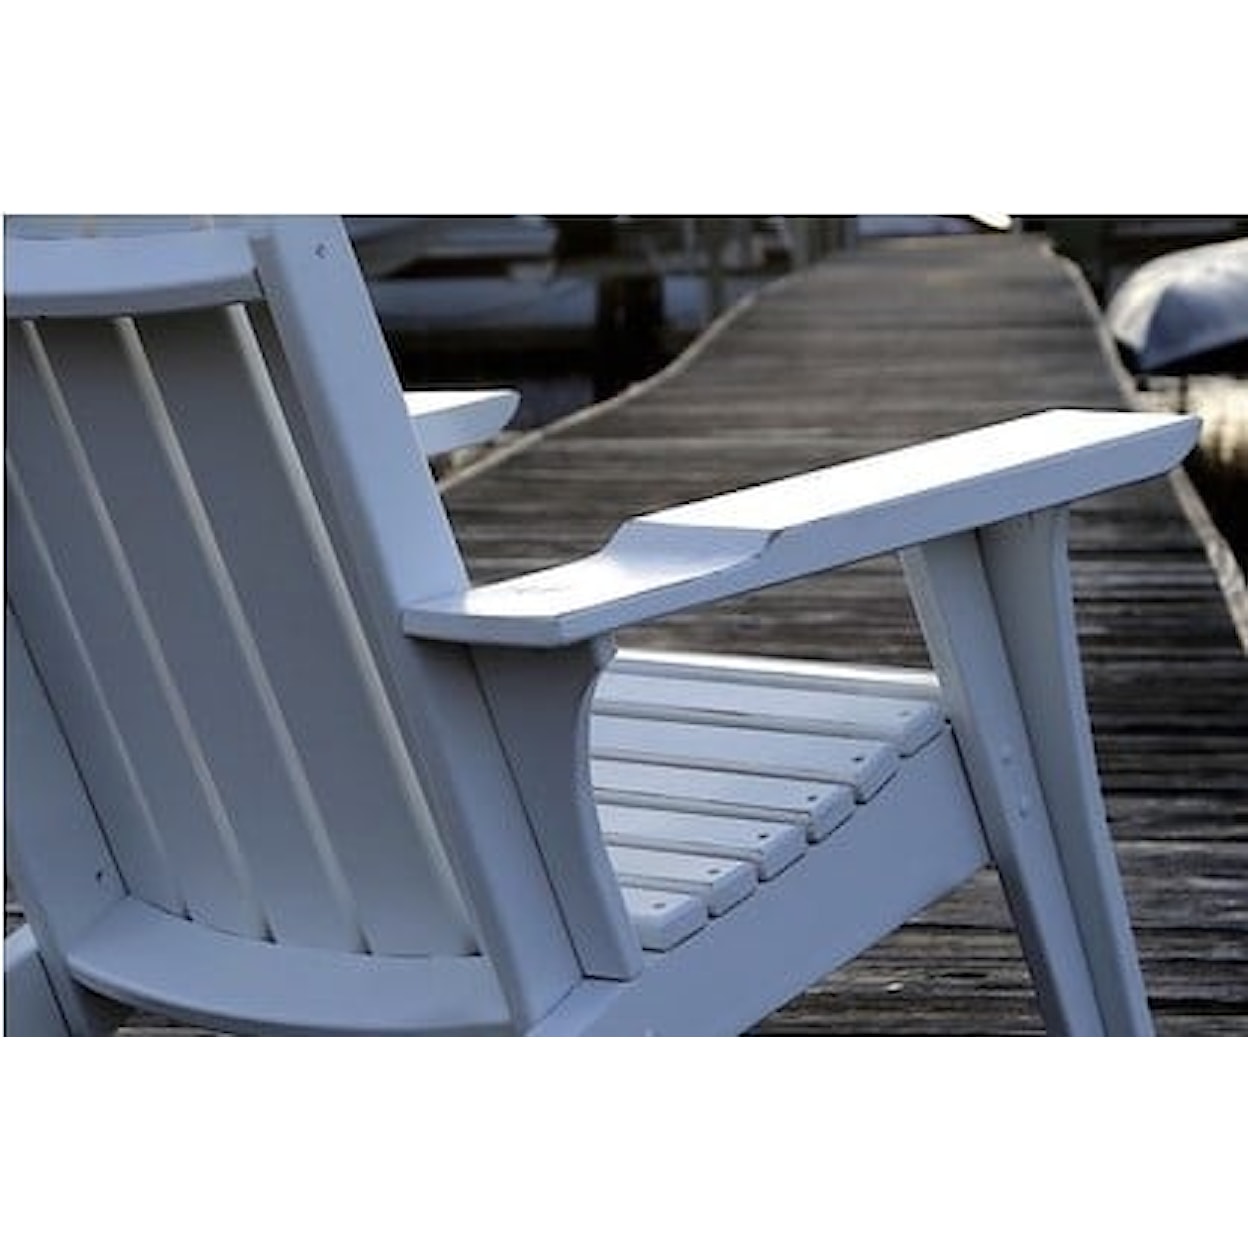 Uwharrie Chair The Jarrett Bay Collection THE "CAROLINE FLARE" CHAIR